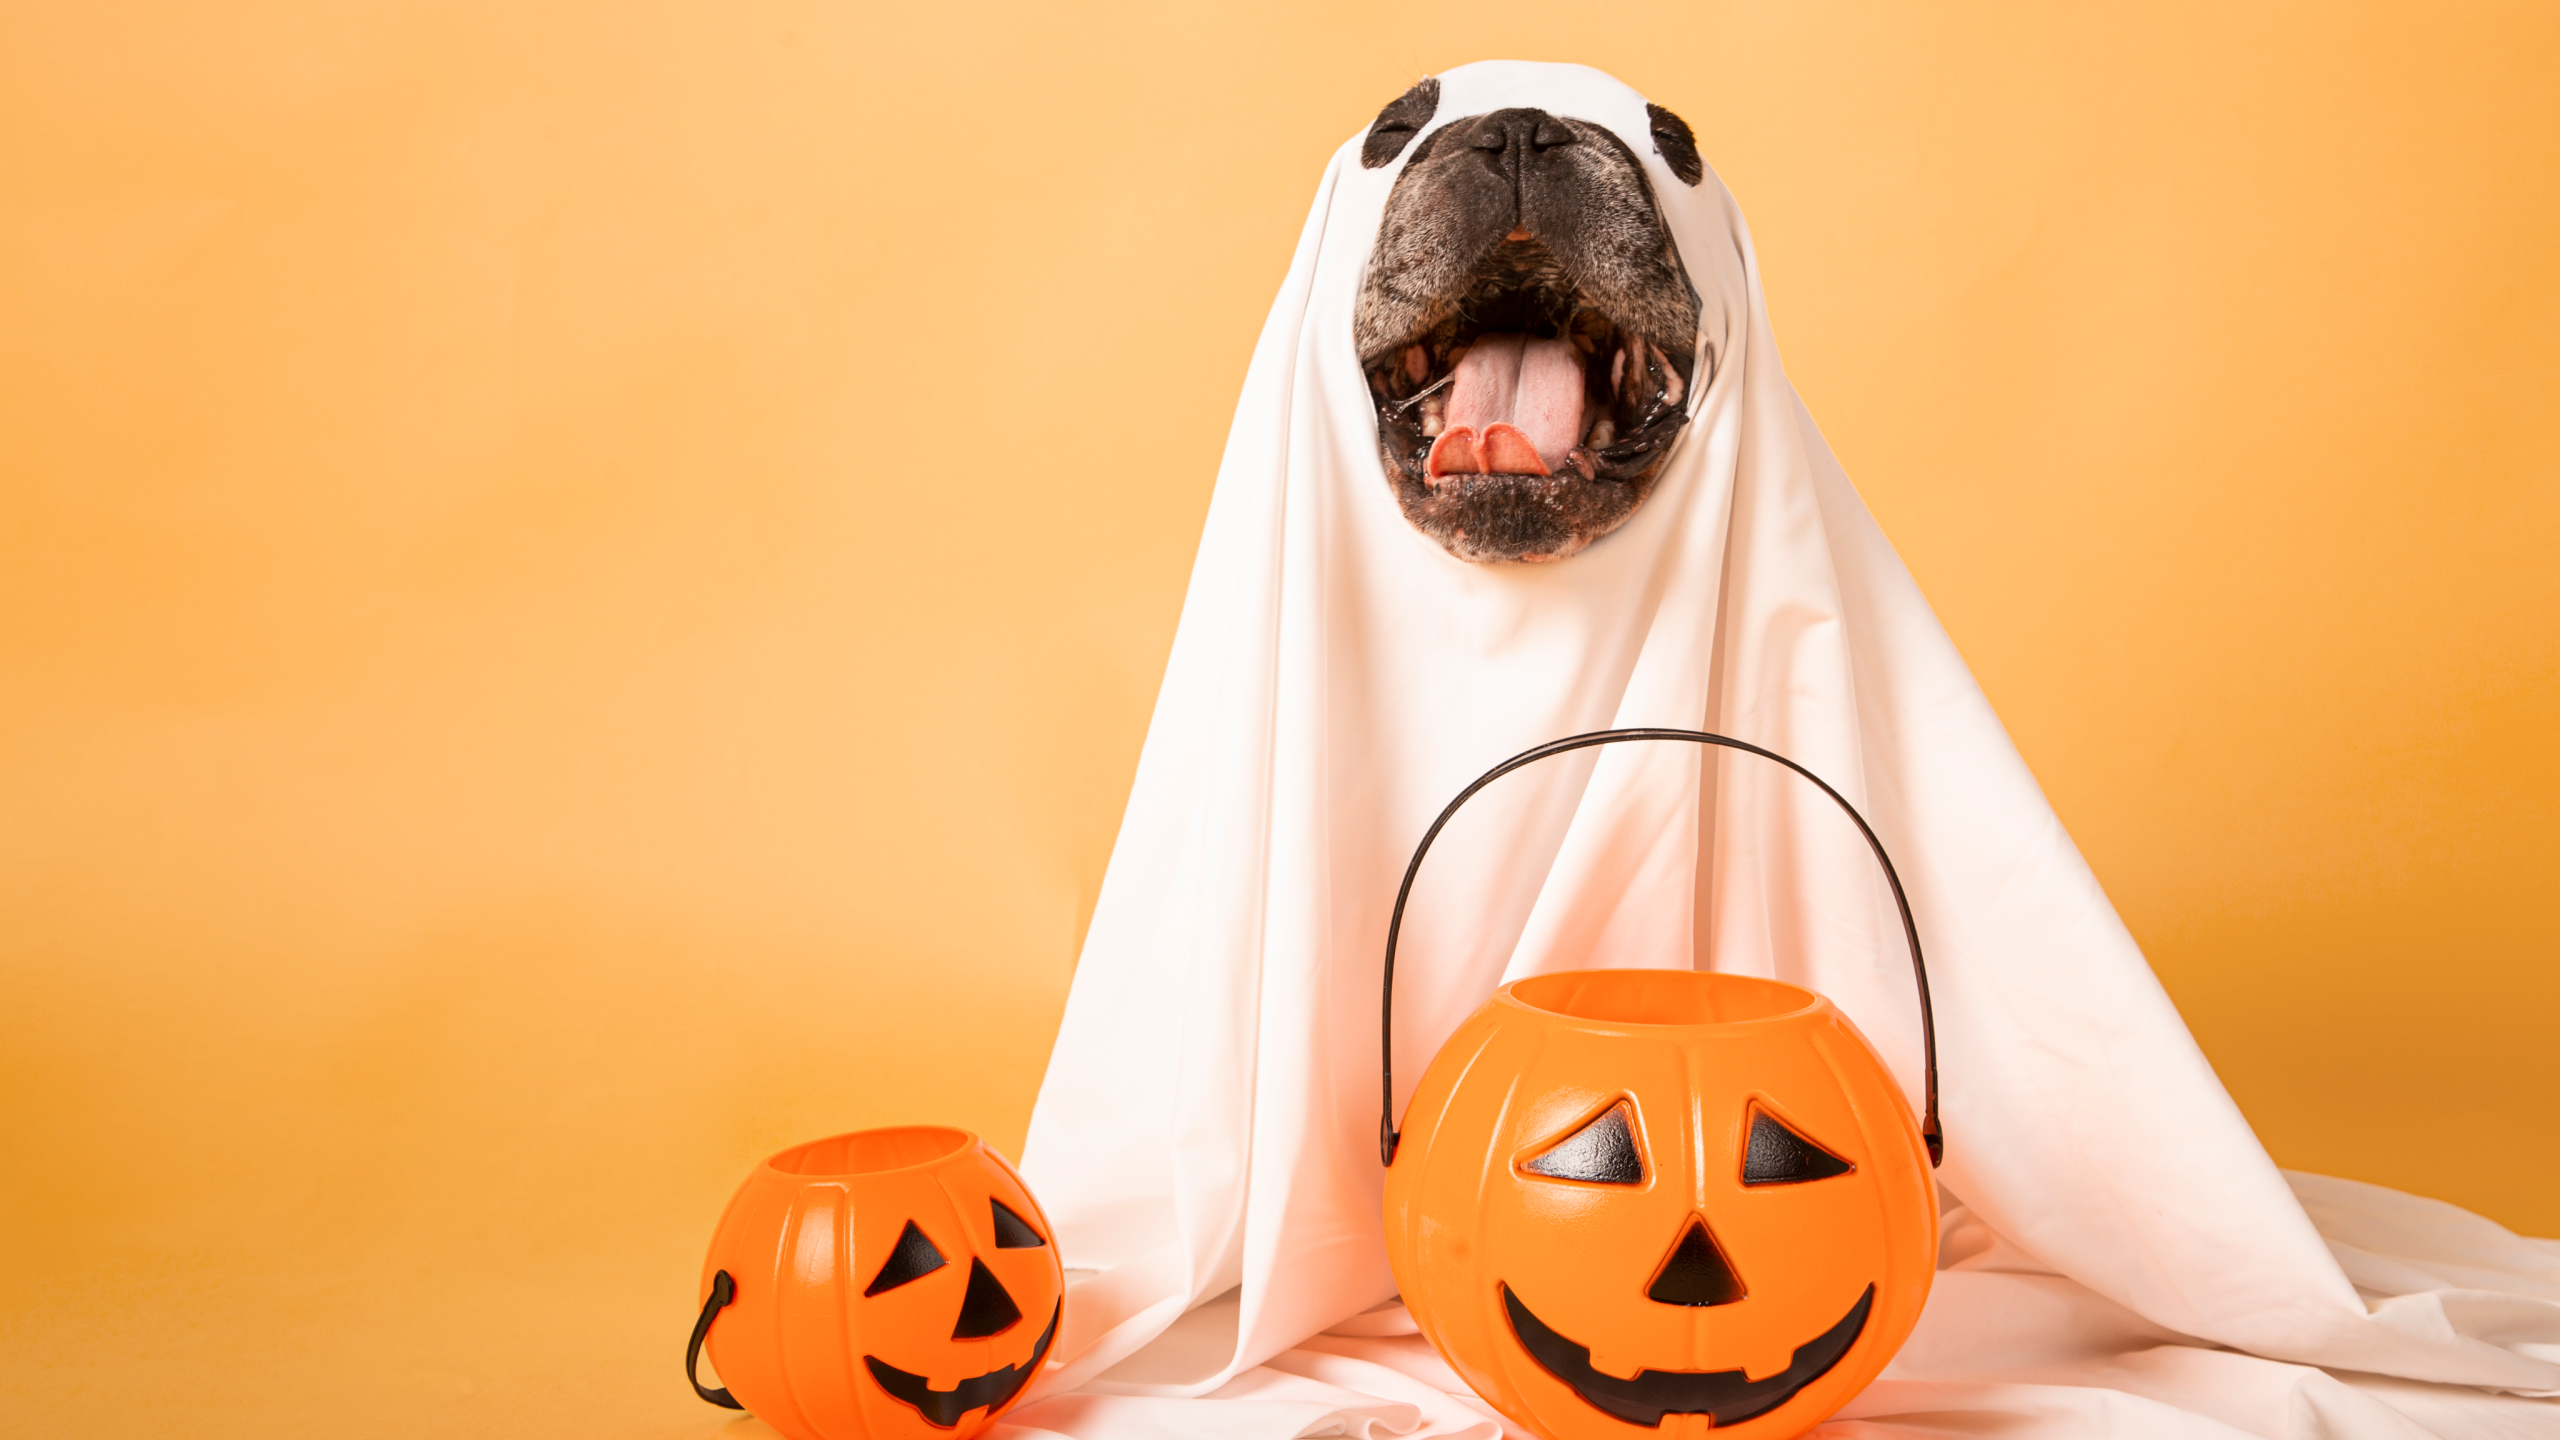 25 Cute & Funny Dog Halloween Costumes For 2021